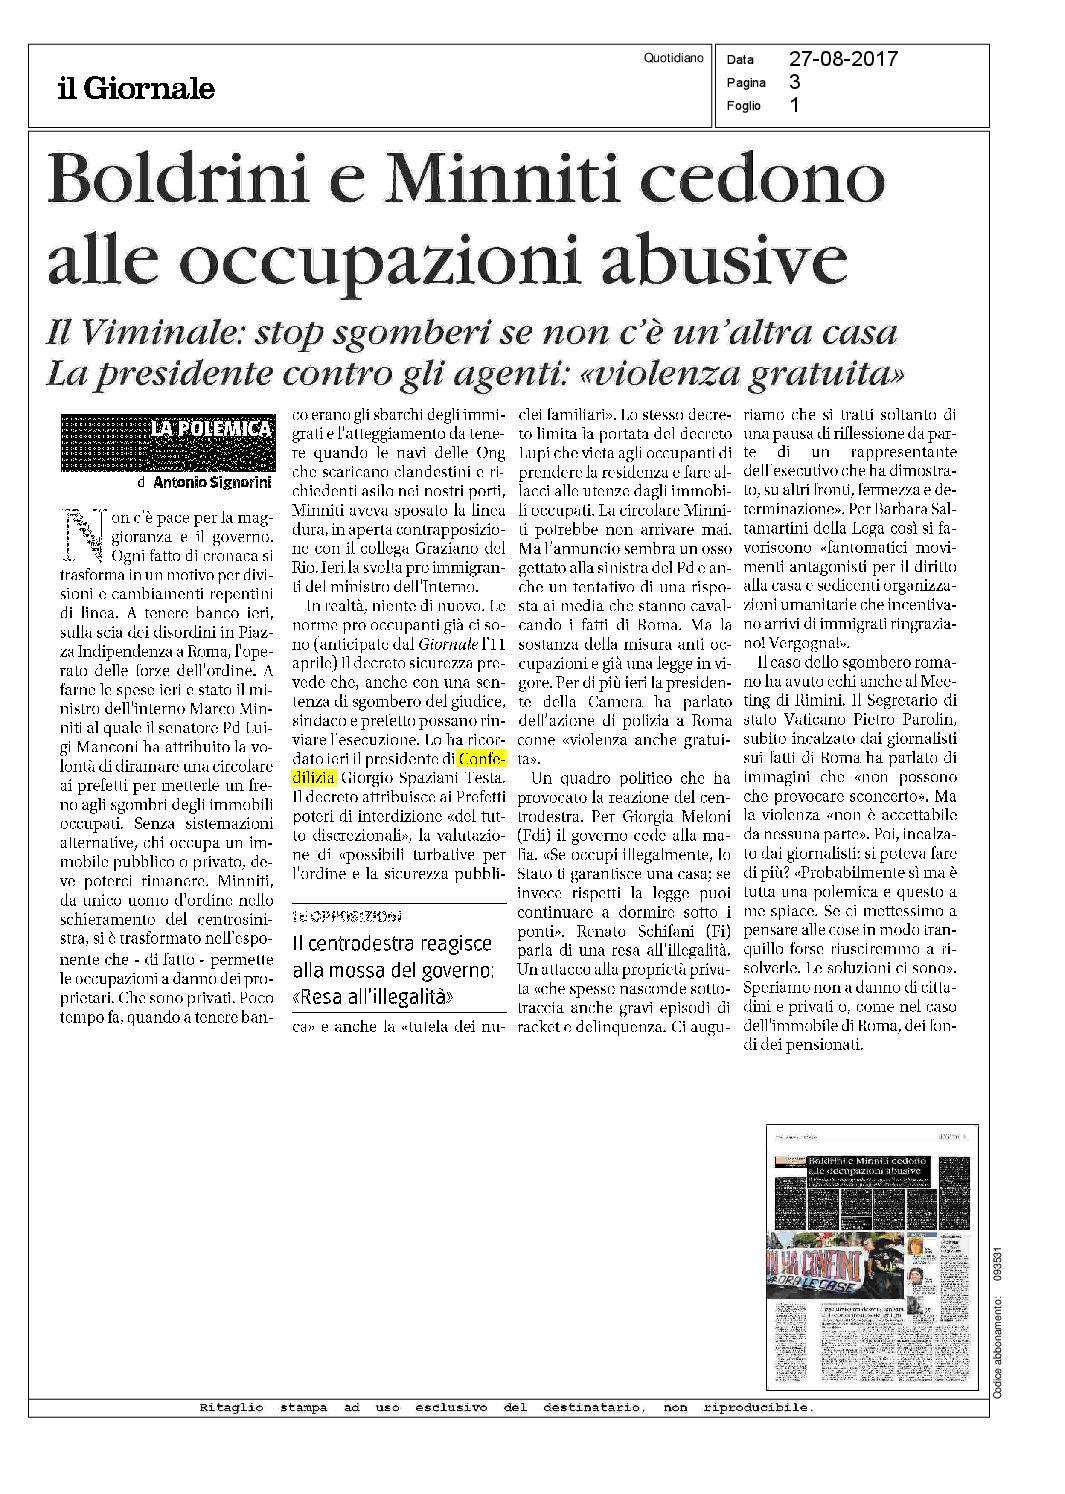 Giornale_27.8.17_2